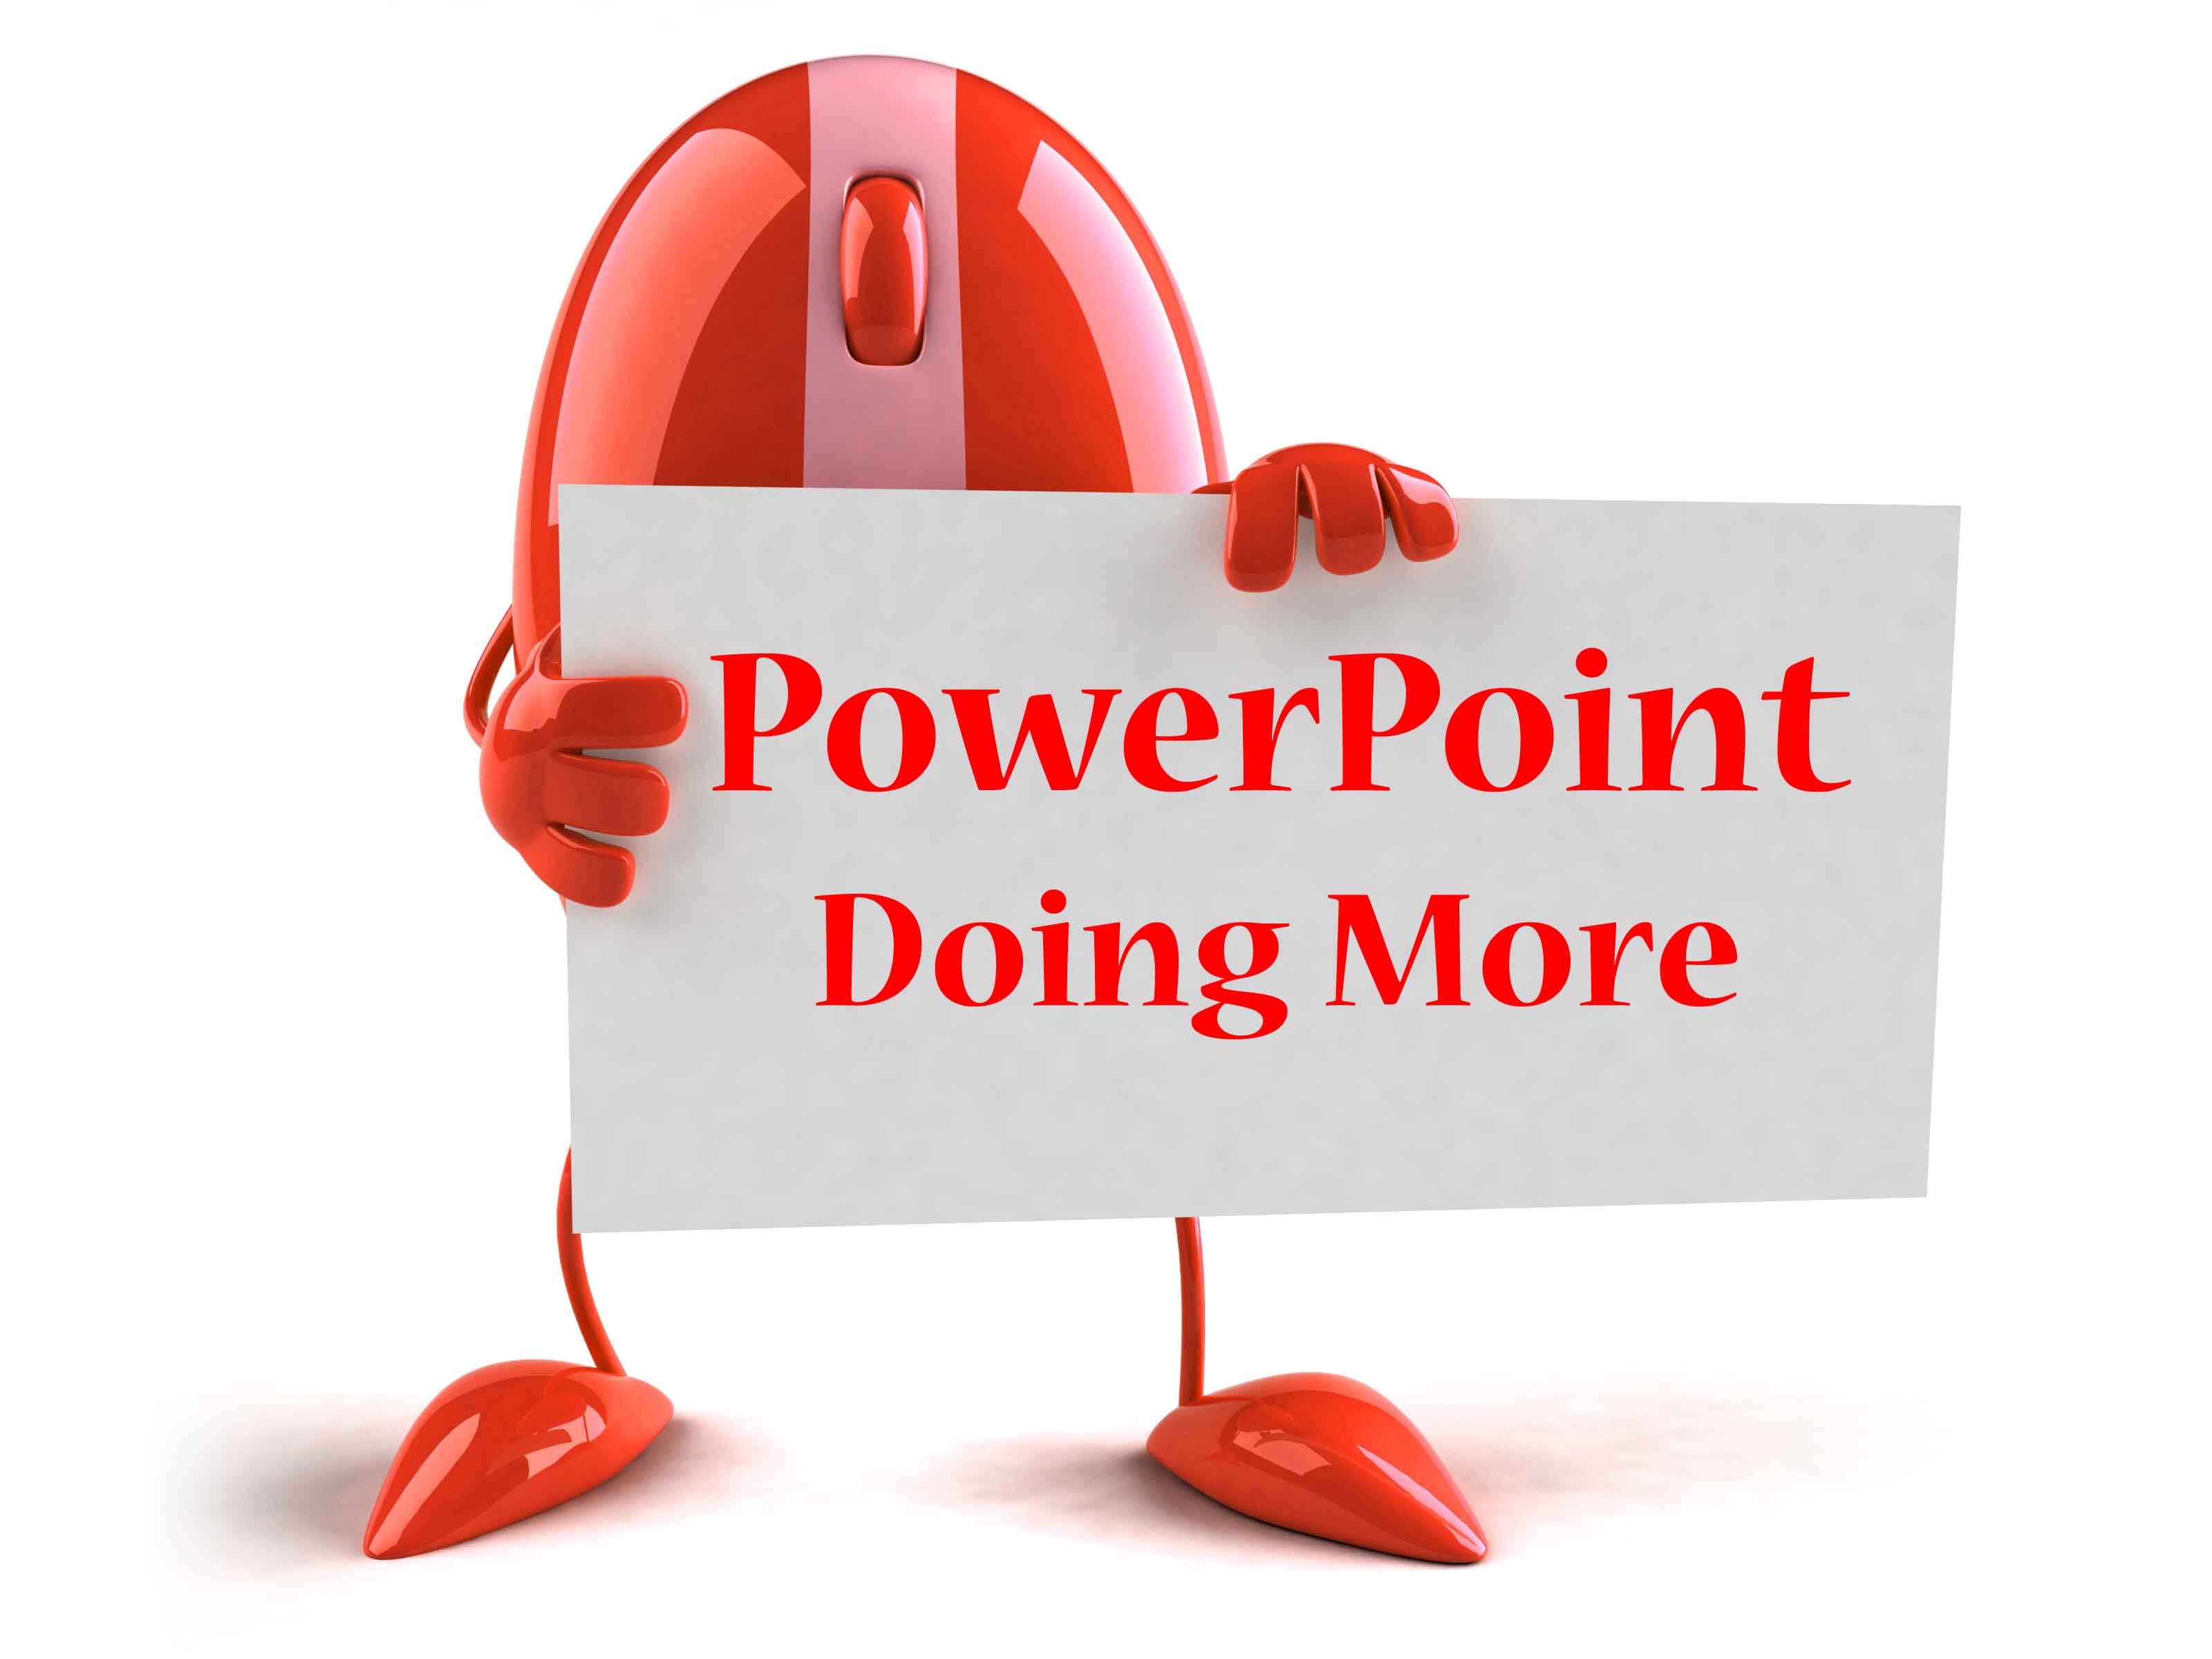 PowerPoint Doing More